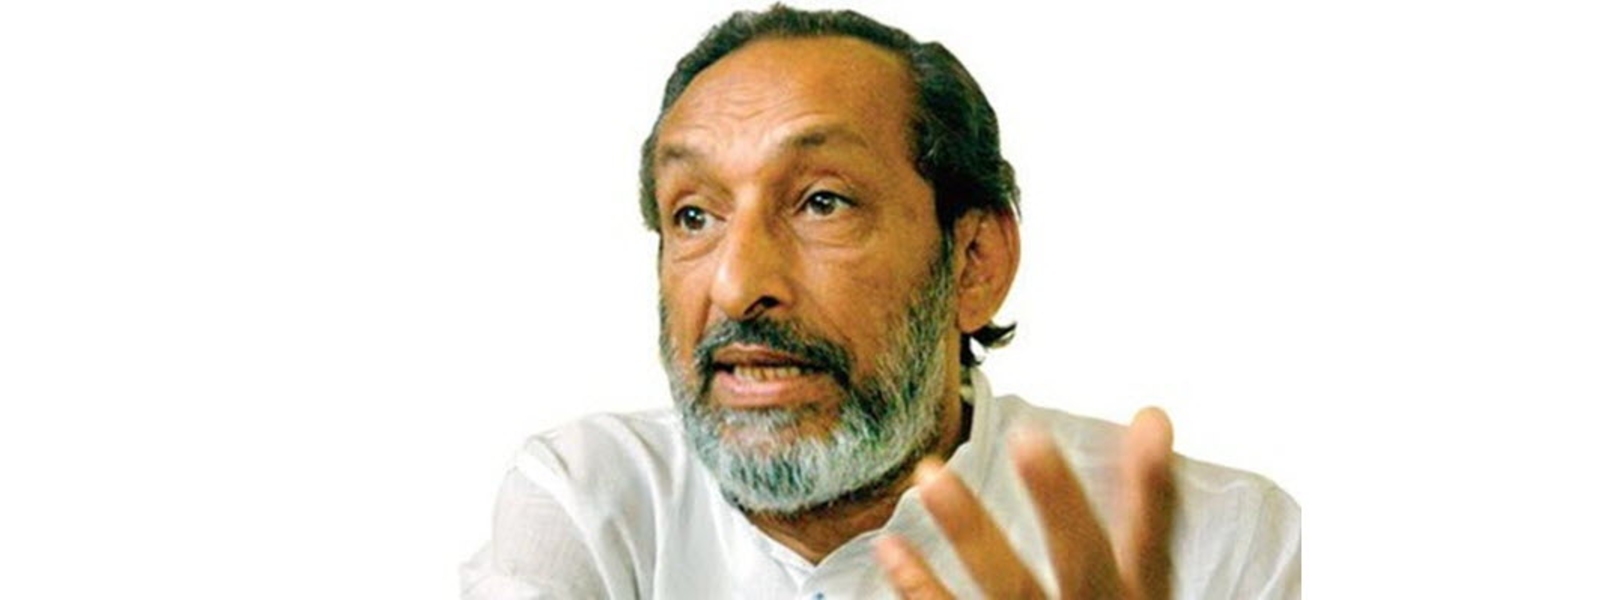 Vasudeva says he cannot function as Minister anymore; Hints resigning